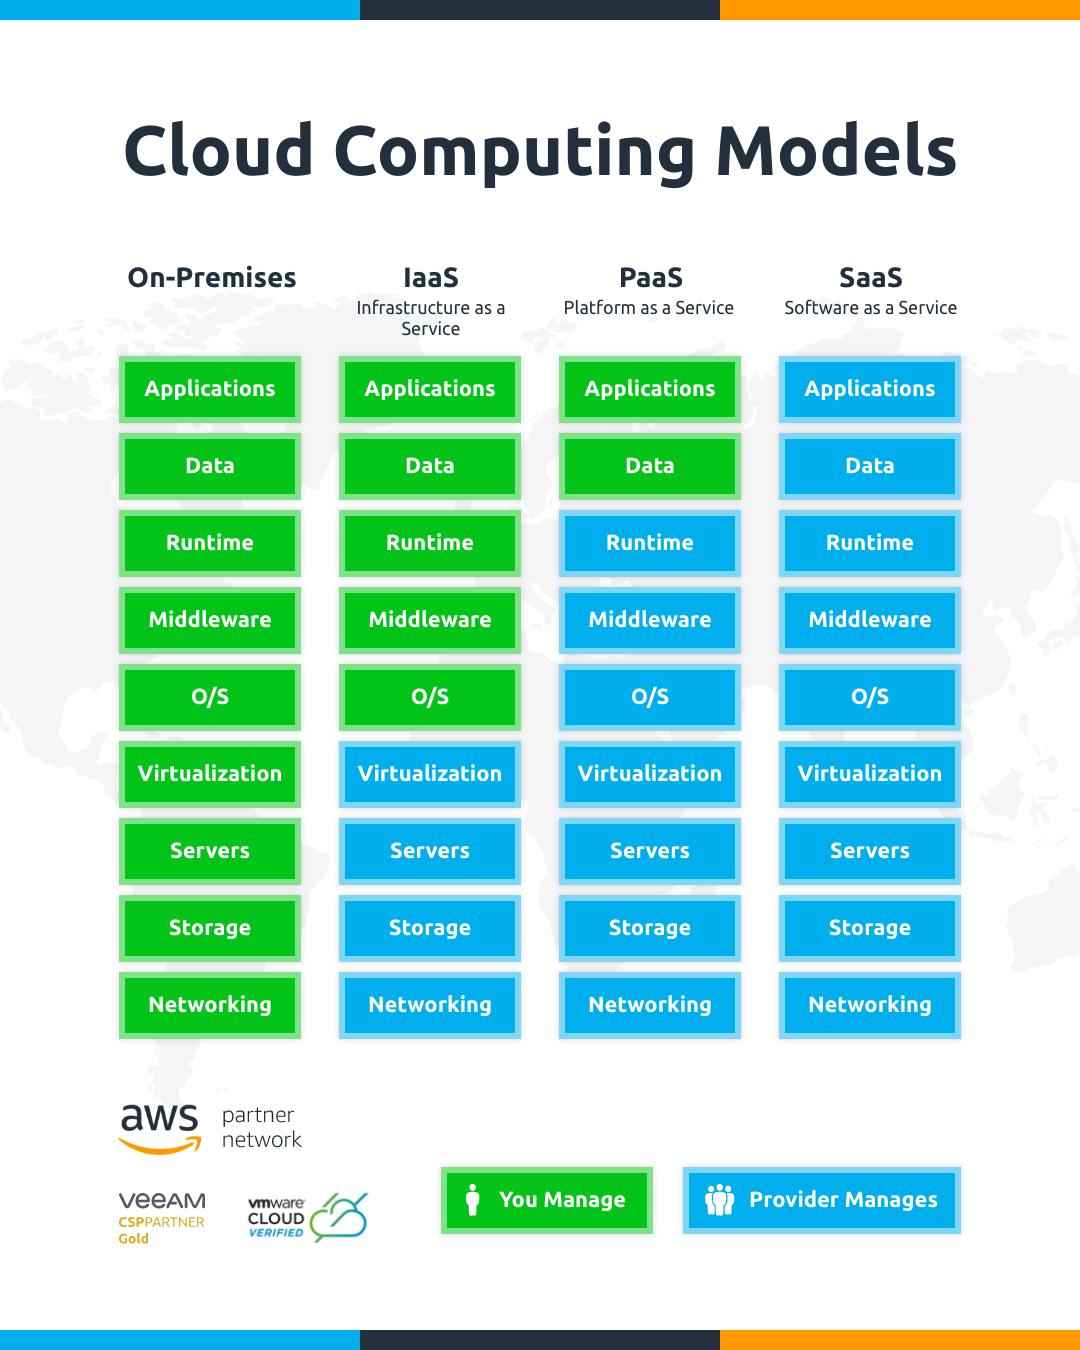 Image gotten from: https://www.heptabit.at/blog/cloud-migration/pros-and-cons-of-different-cloud-computing-models